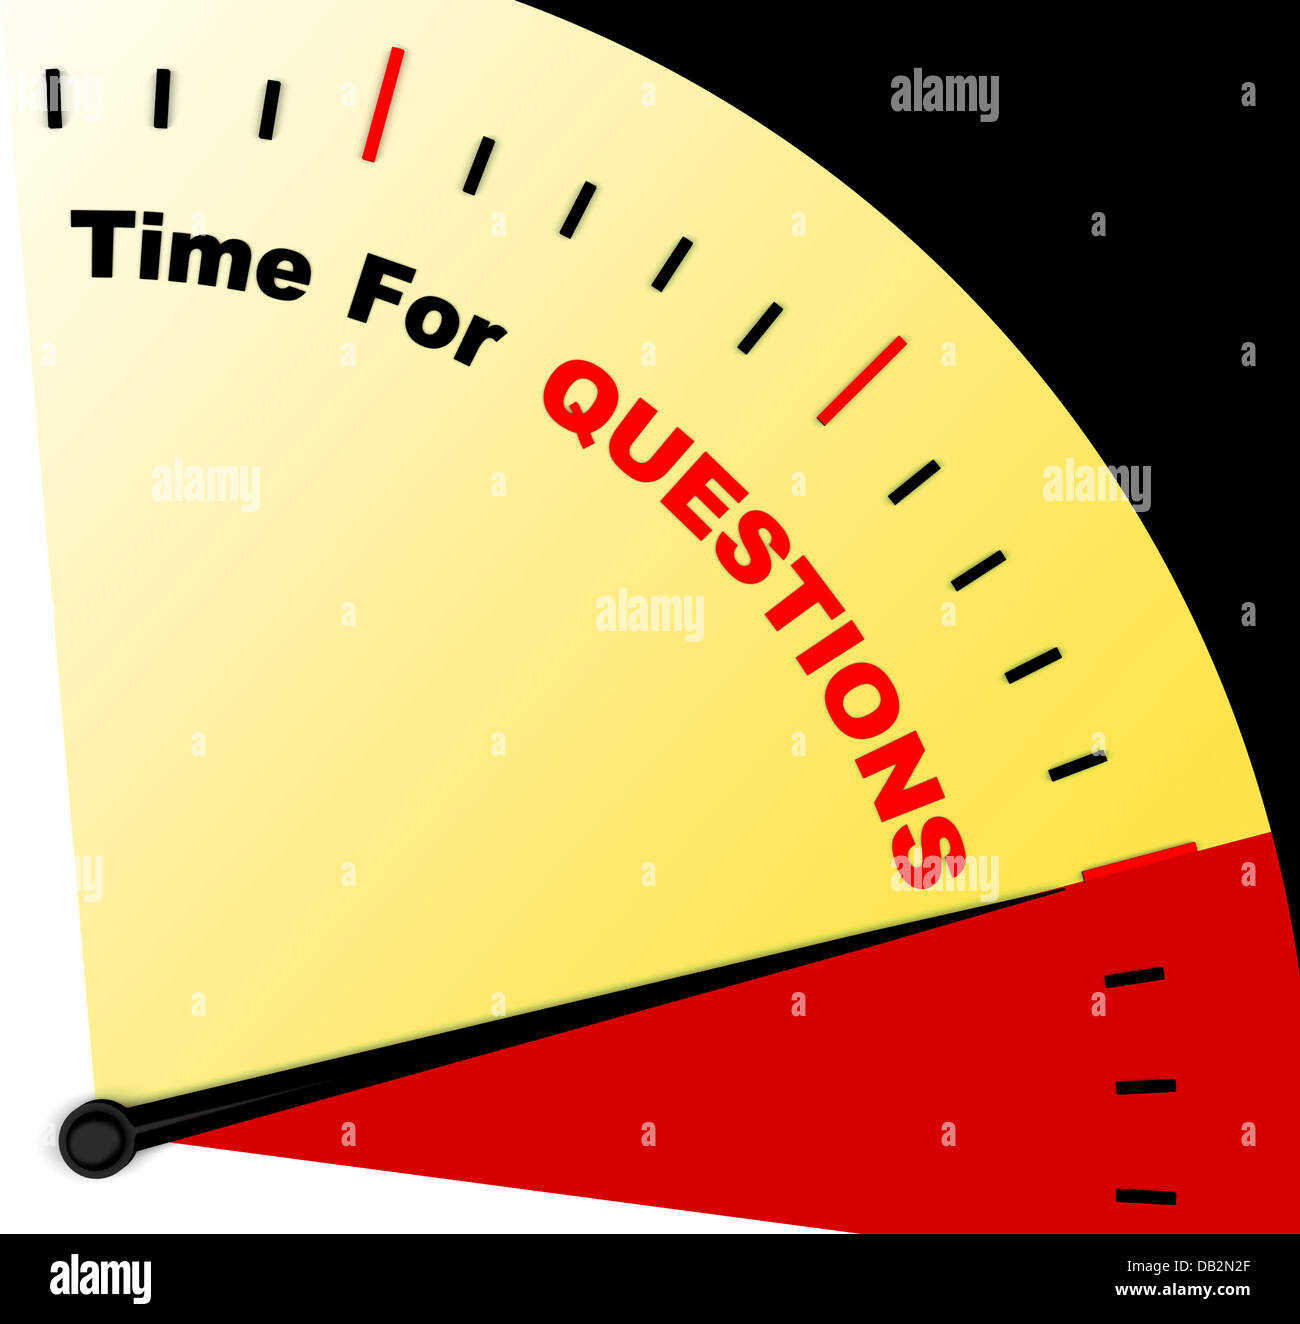 Time For Questions Message Meaning Answers Needed Stock Photo